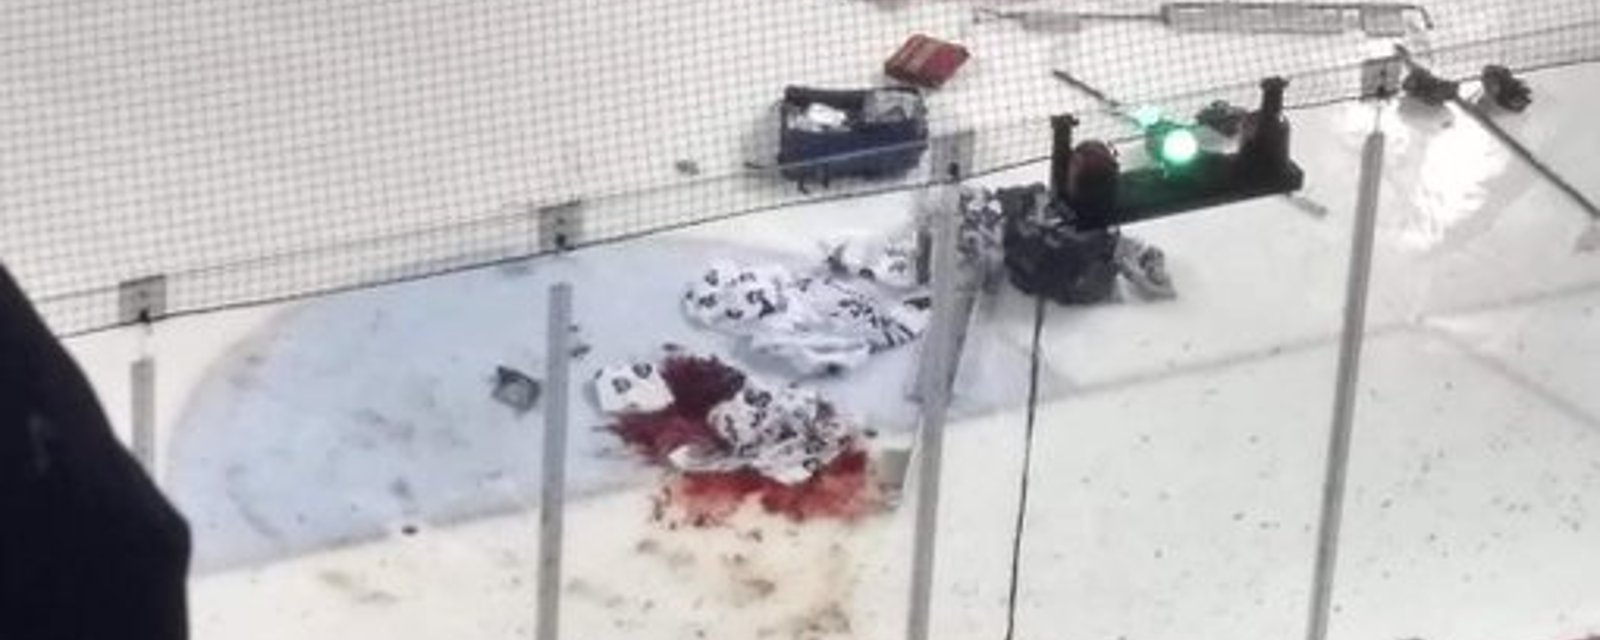 IceDogs goalie Tucker Tynan rushed to hospital after getting cut by a skate! 